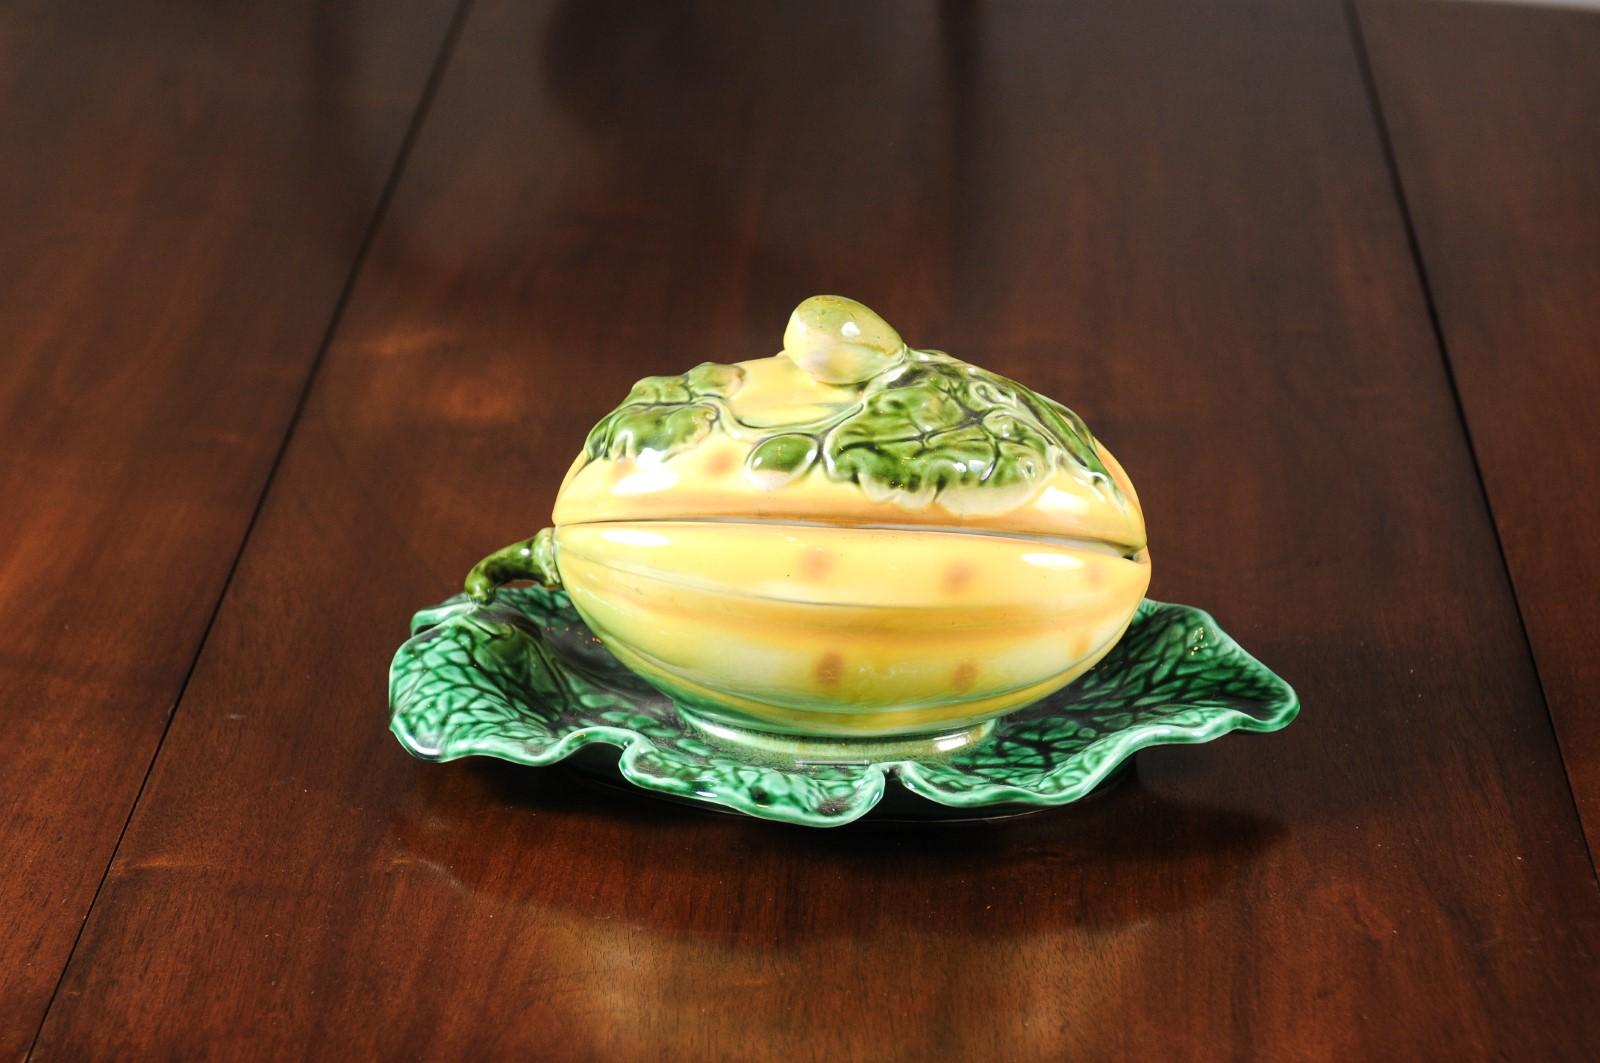 A French Sarreguemines Majolica squash-decorated lidded dish from the 19th century resting on a green leaf. Born in France during the 19th century, this Sarreguemines Majolica features a yellow and green glazed Majolica lidded dish, resting on a